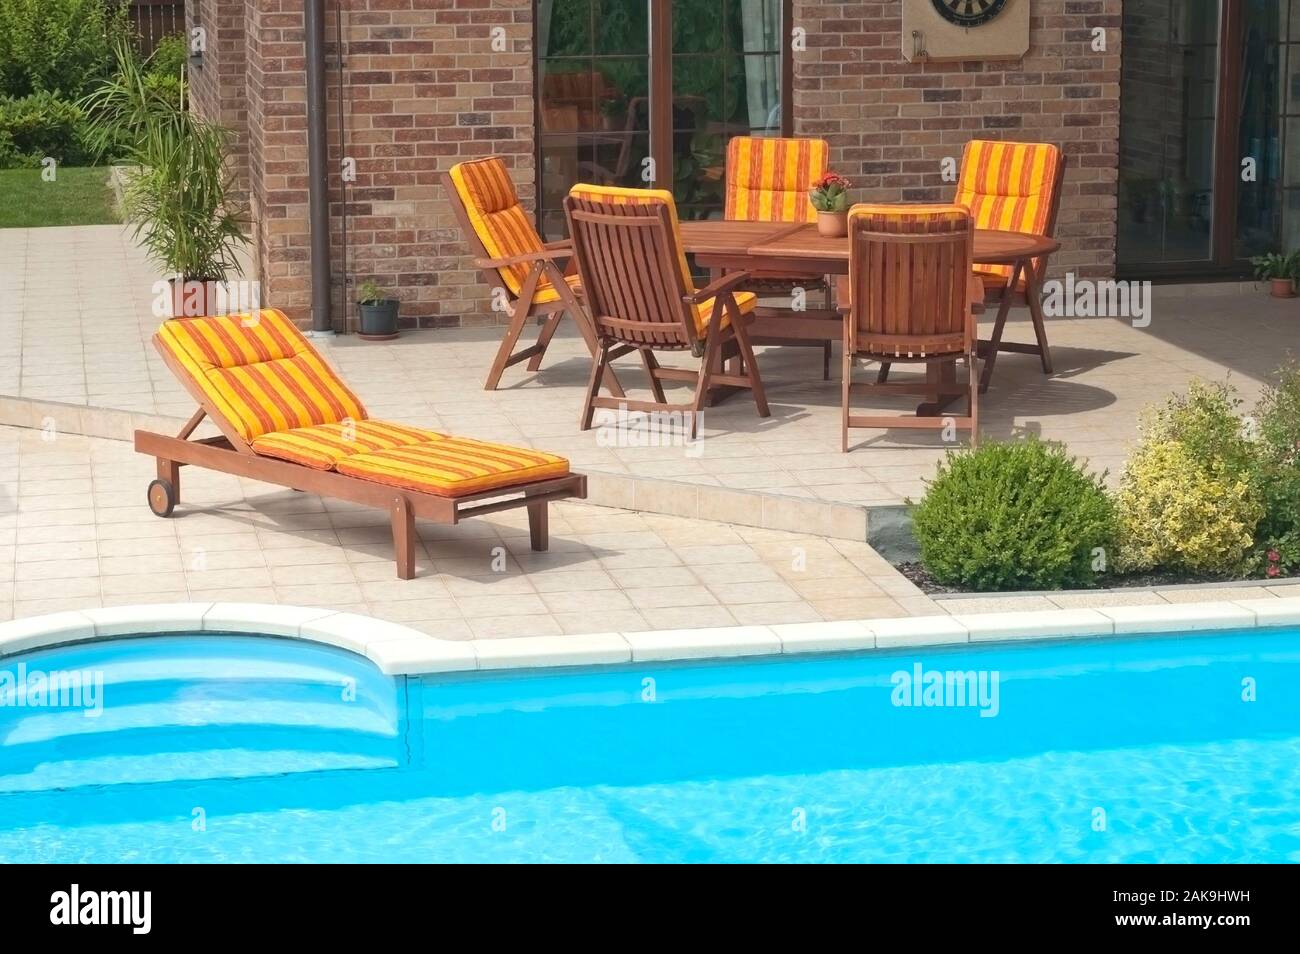 The Garden furniture by the pool Stock Photo